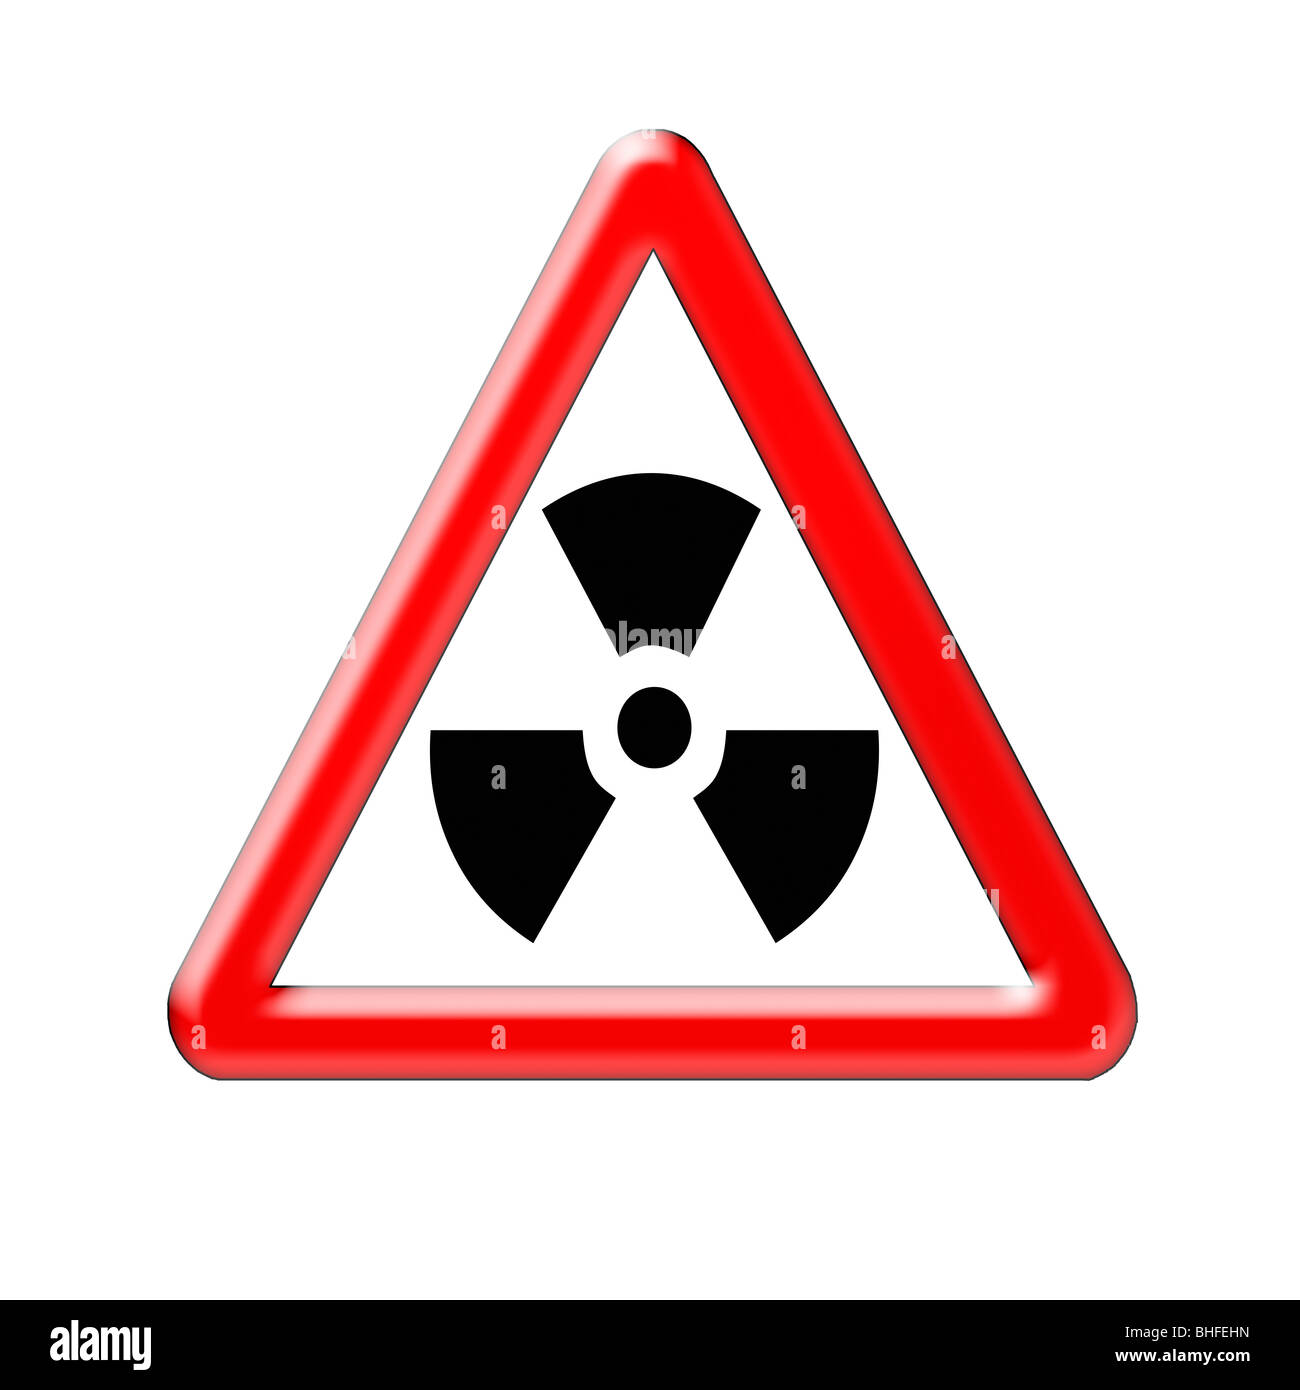 Radiation Hazard Warning Road Sign. Conceptual image of Anti Nuclear Protest Stock Photo